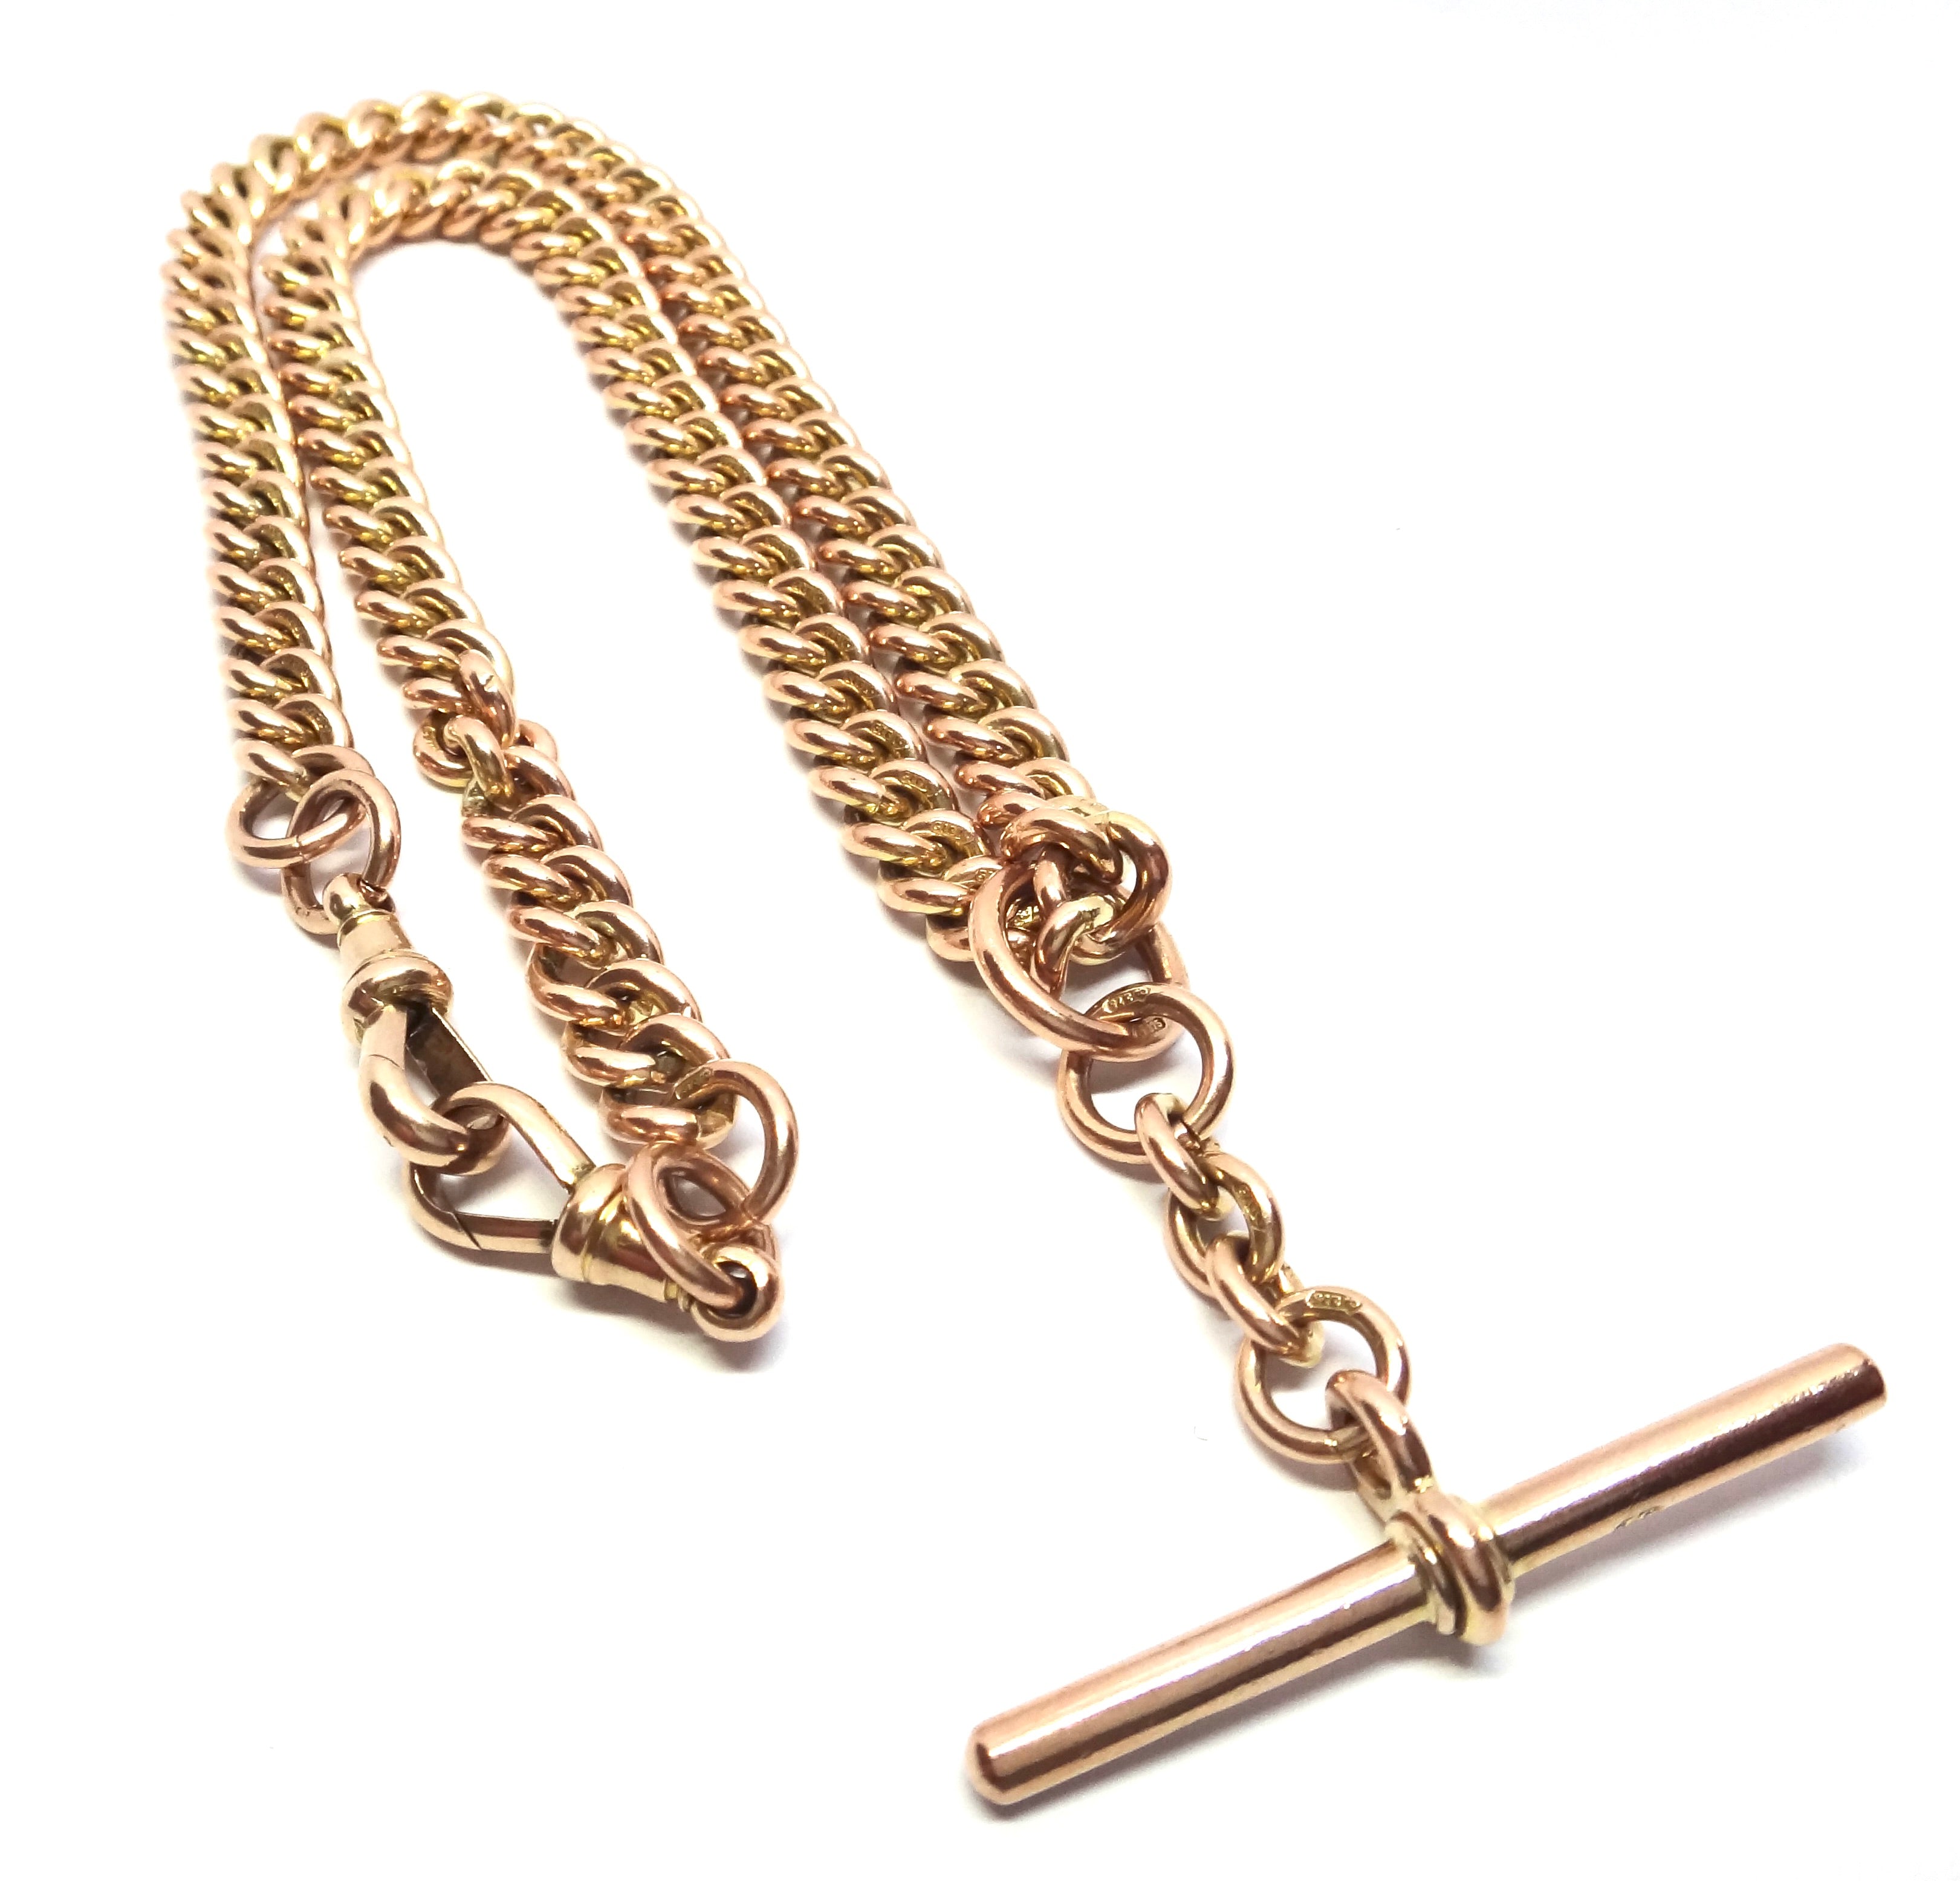 Heavy ANTIQUE 9ct Rose Gold Albert/Fob Chain Necklace c.1900